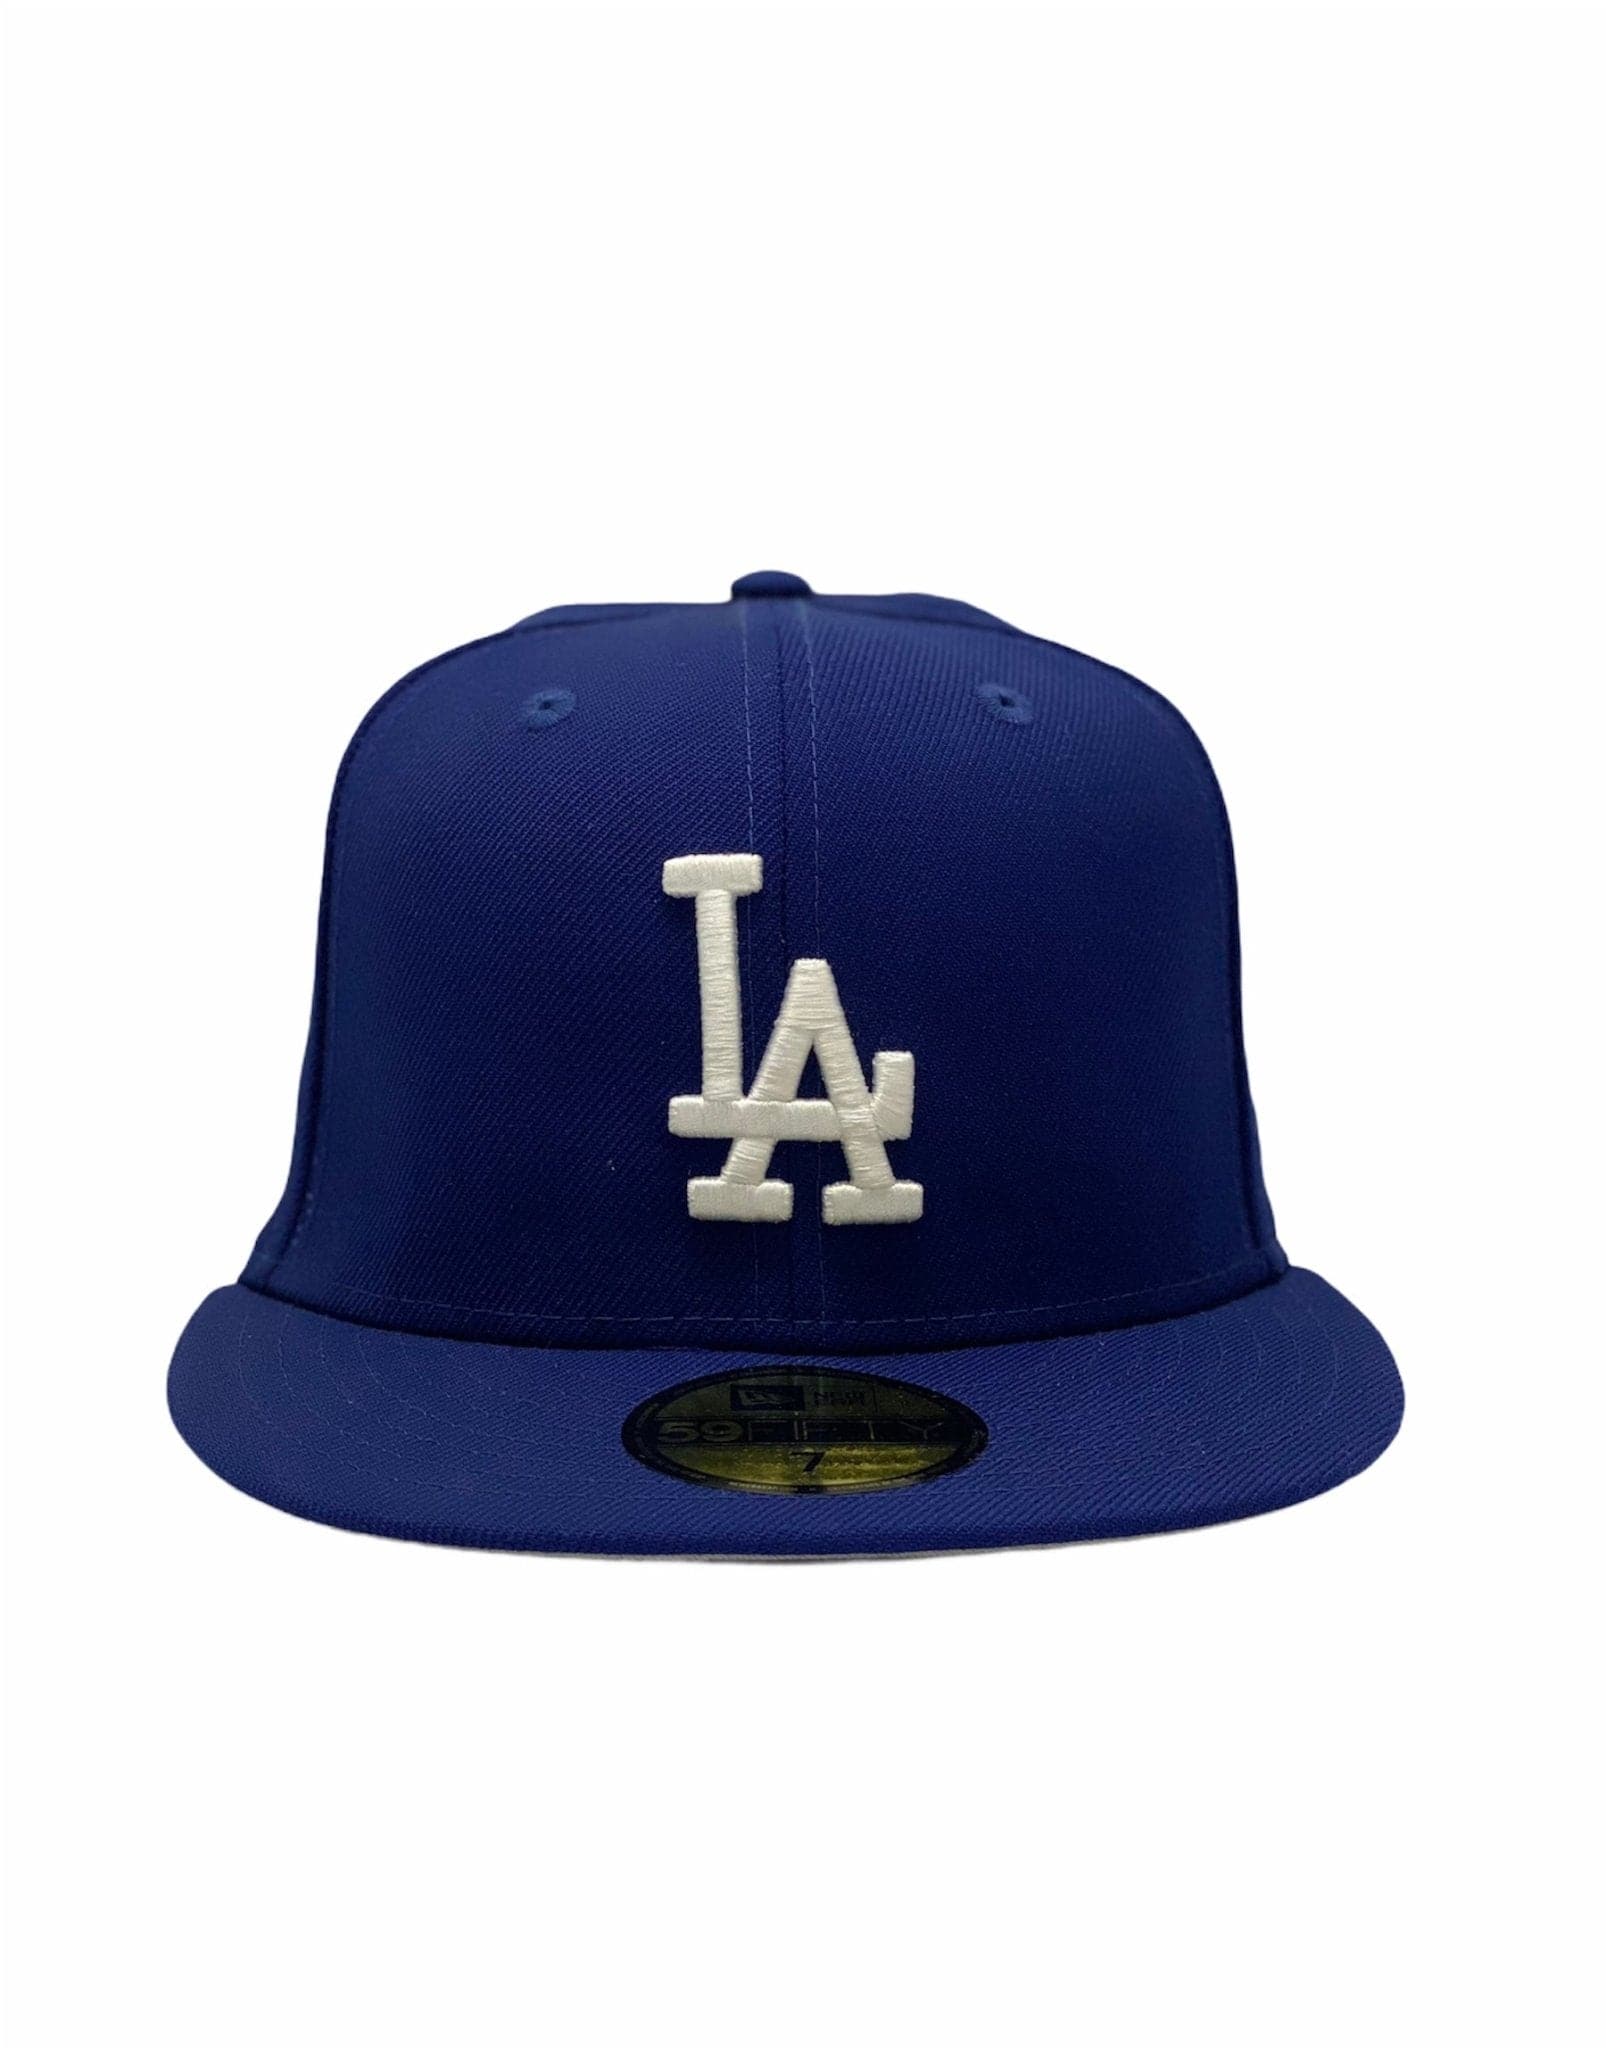 NEW ERA - 59FIFTY LOS ANGELES "DODGERS" 1988 WS FITTED (ROYAL) - The Magnolia Park